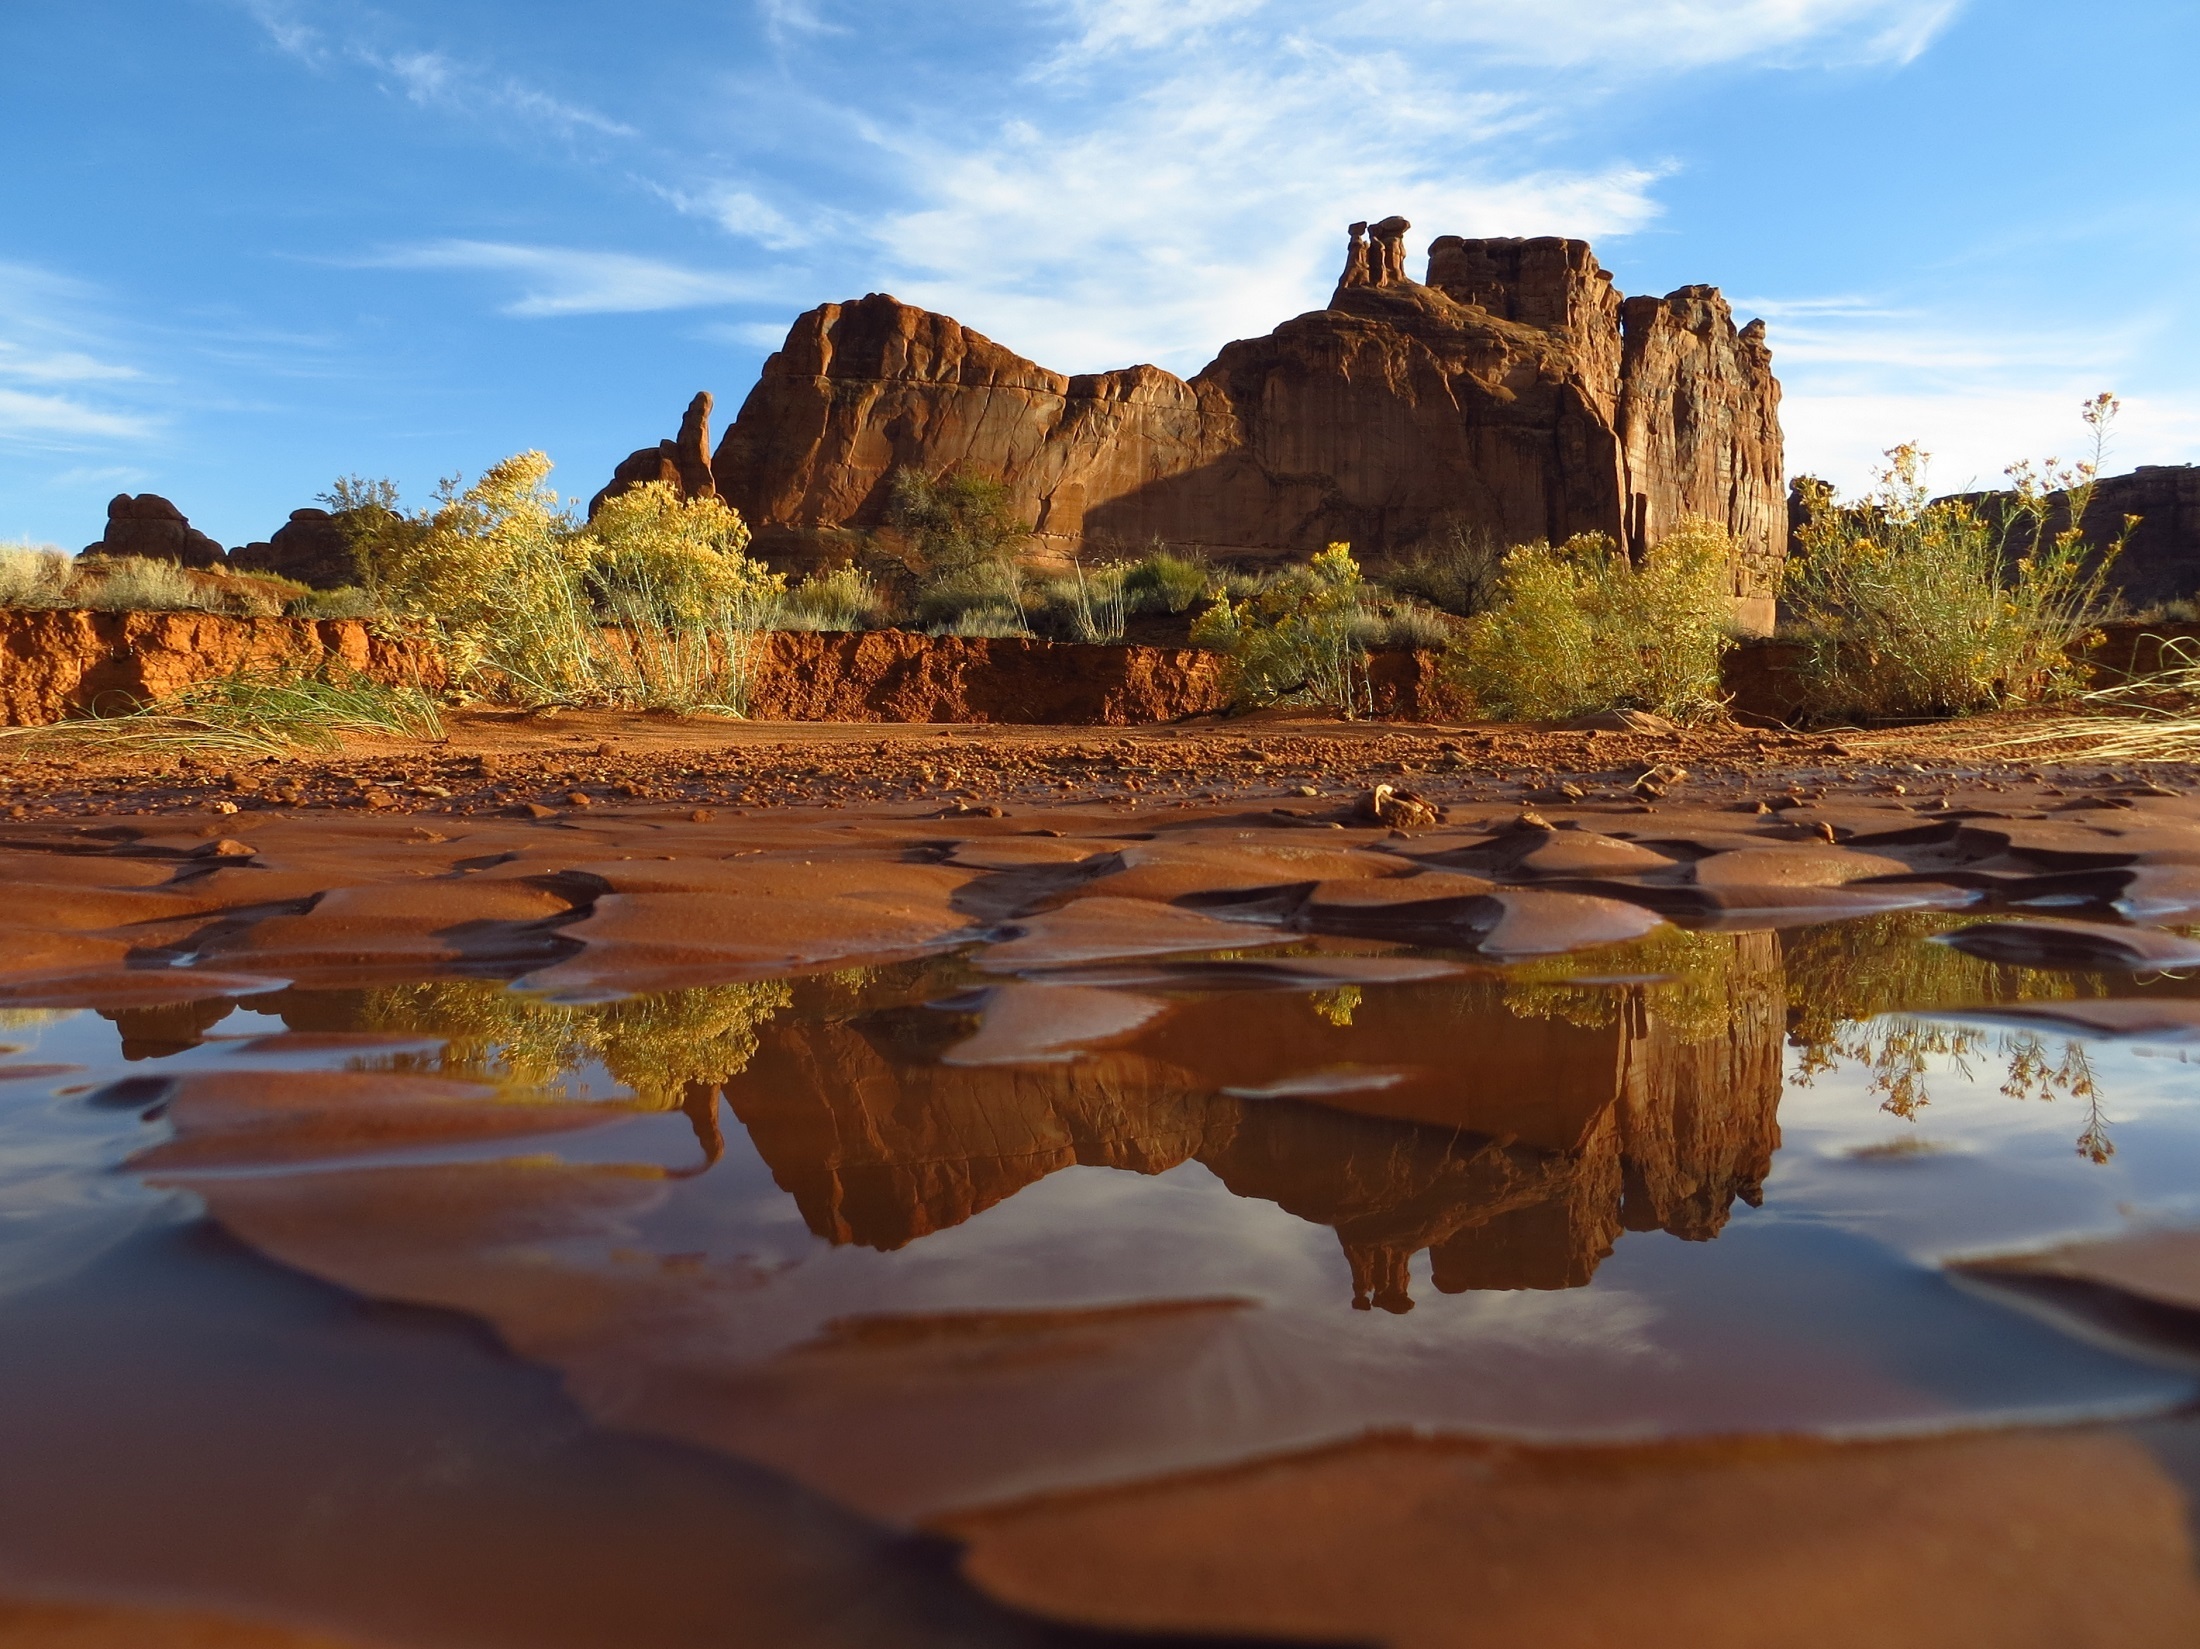 utah, earth, arches national park, desert, nature, reflection, sandstone, usa, water, wilderness, national park FHD, 4K, UHD